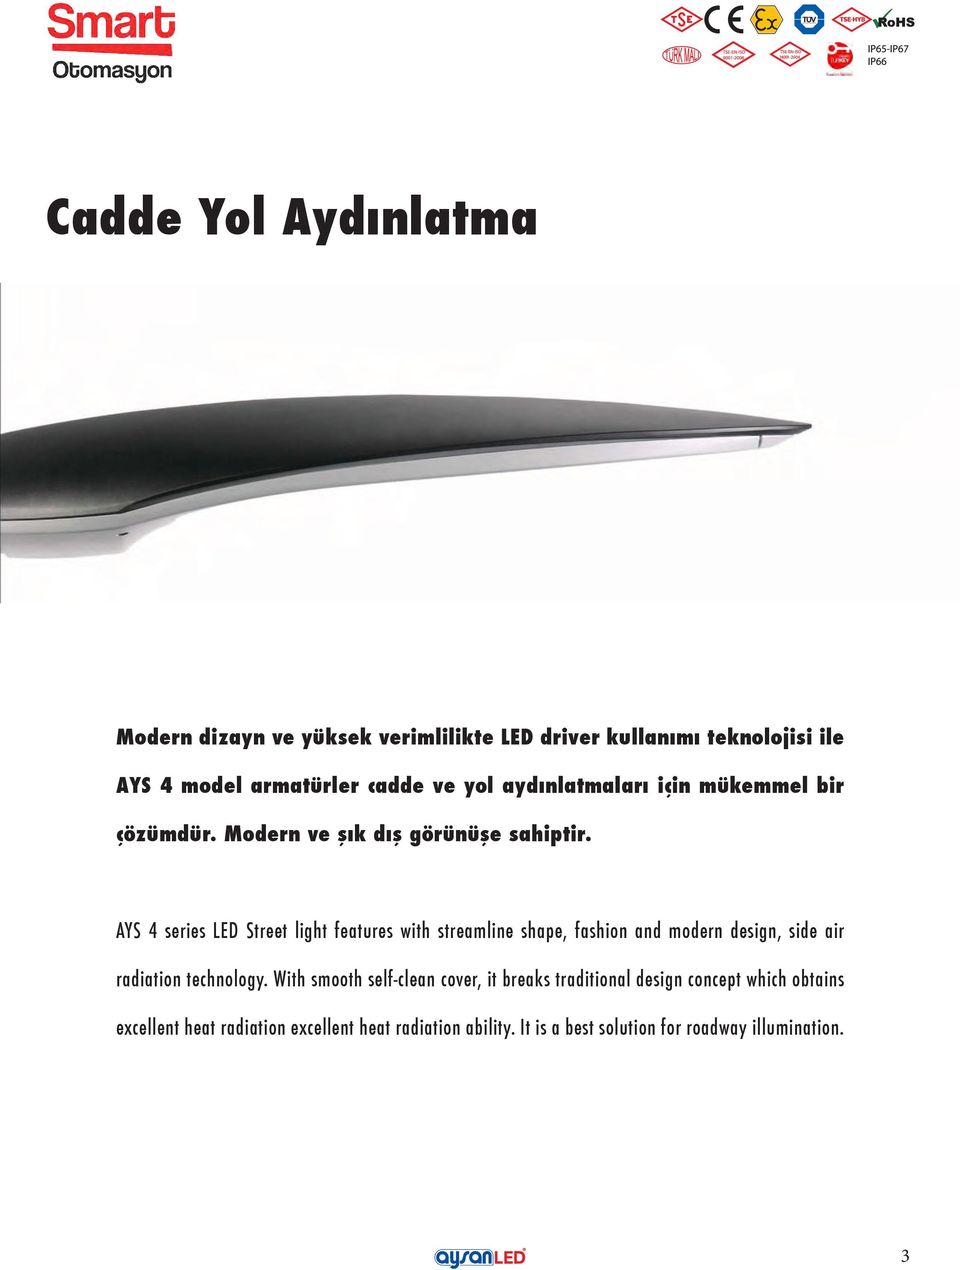 AYS 4 series LED Street light features with streamline shape, fashion and modern design, side air radiation technology.